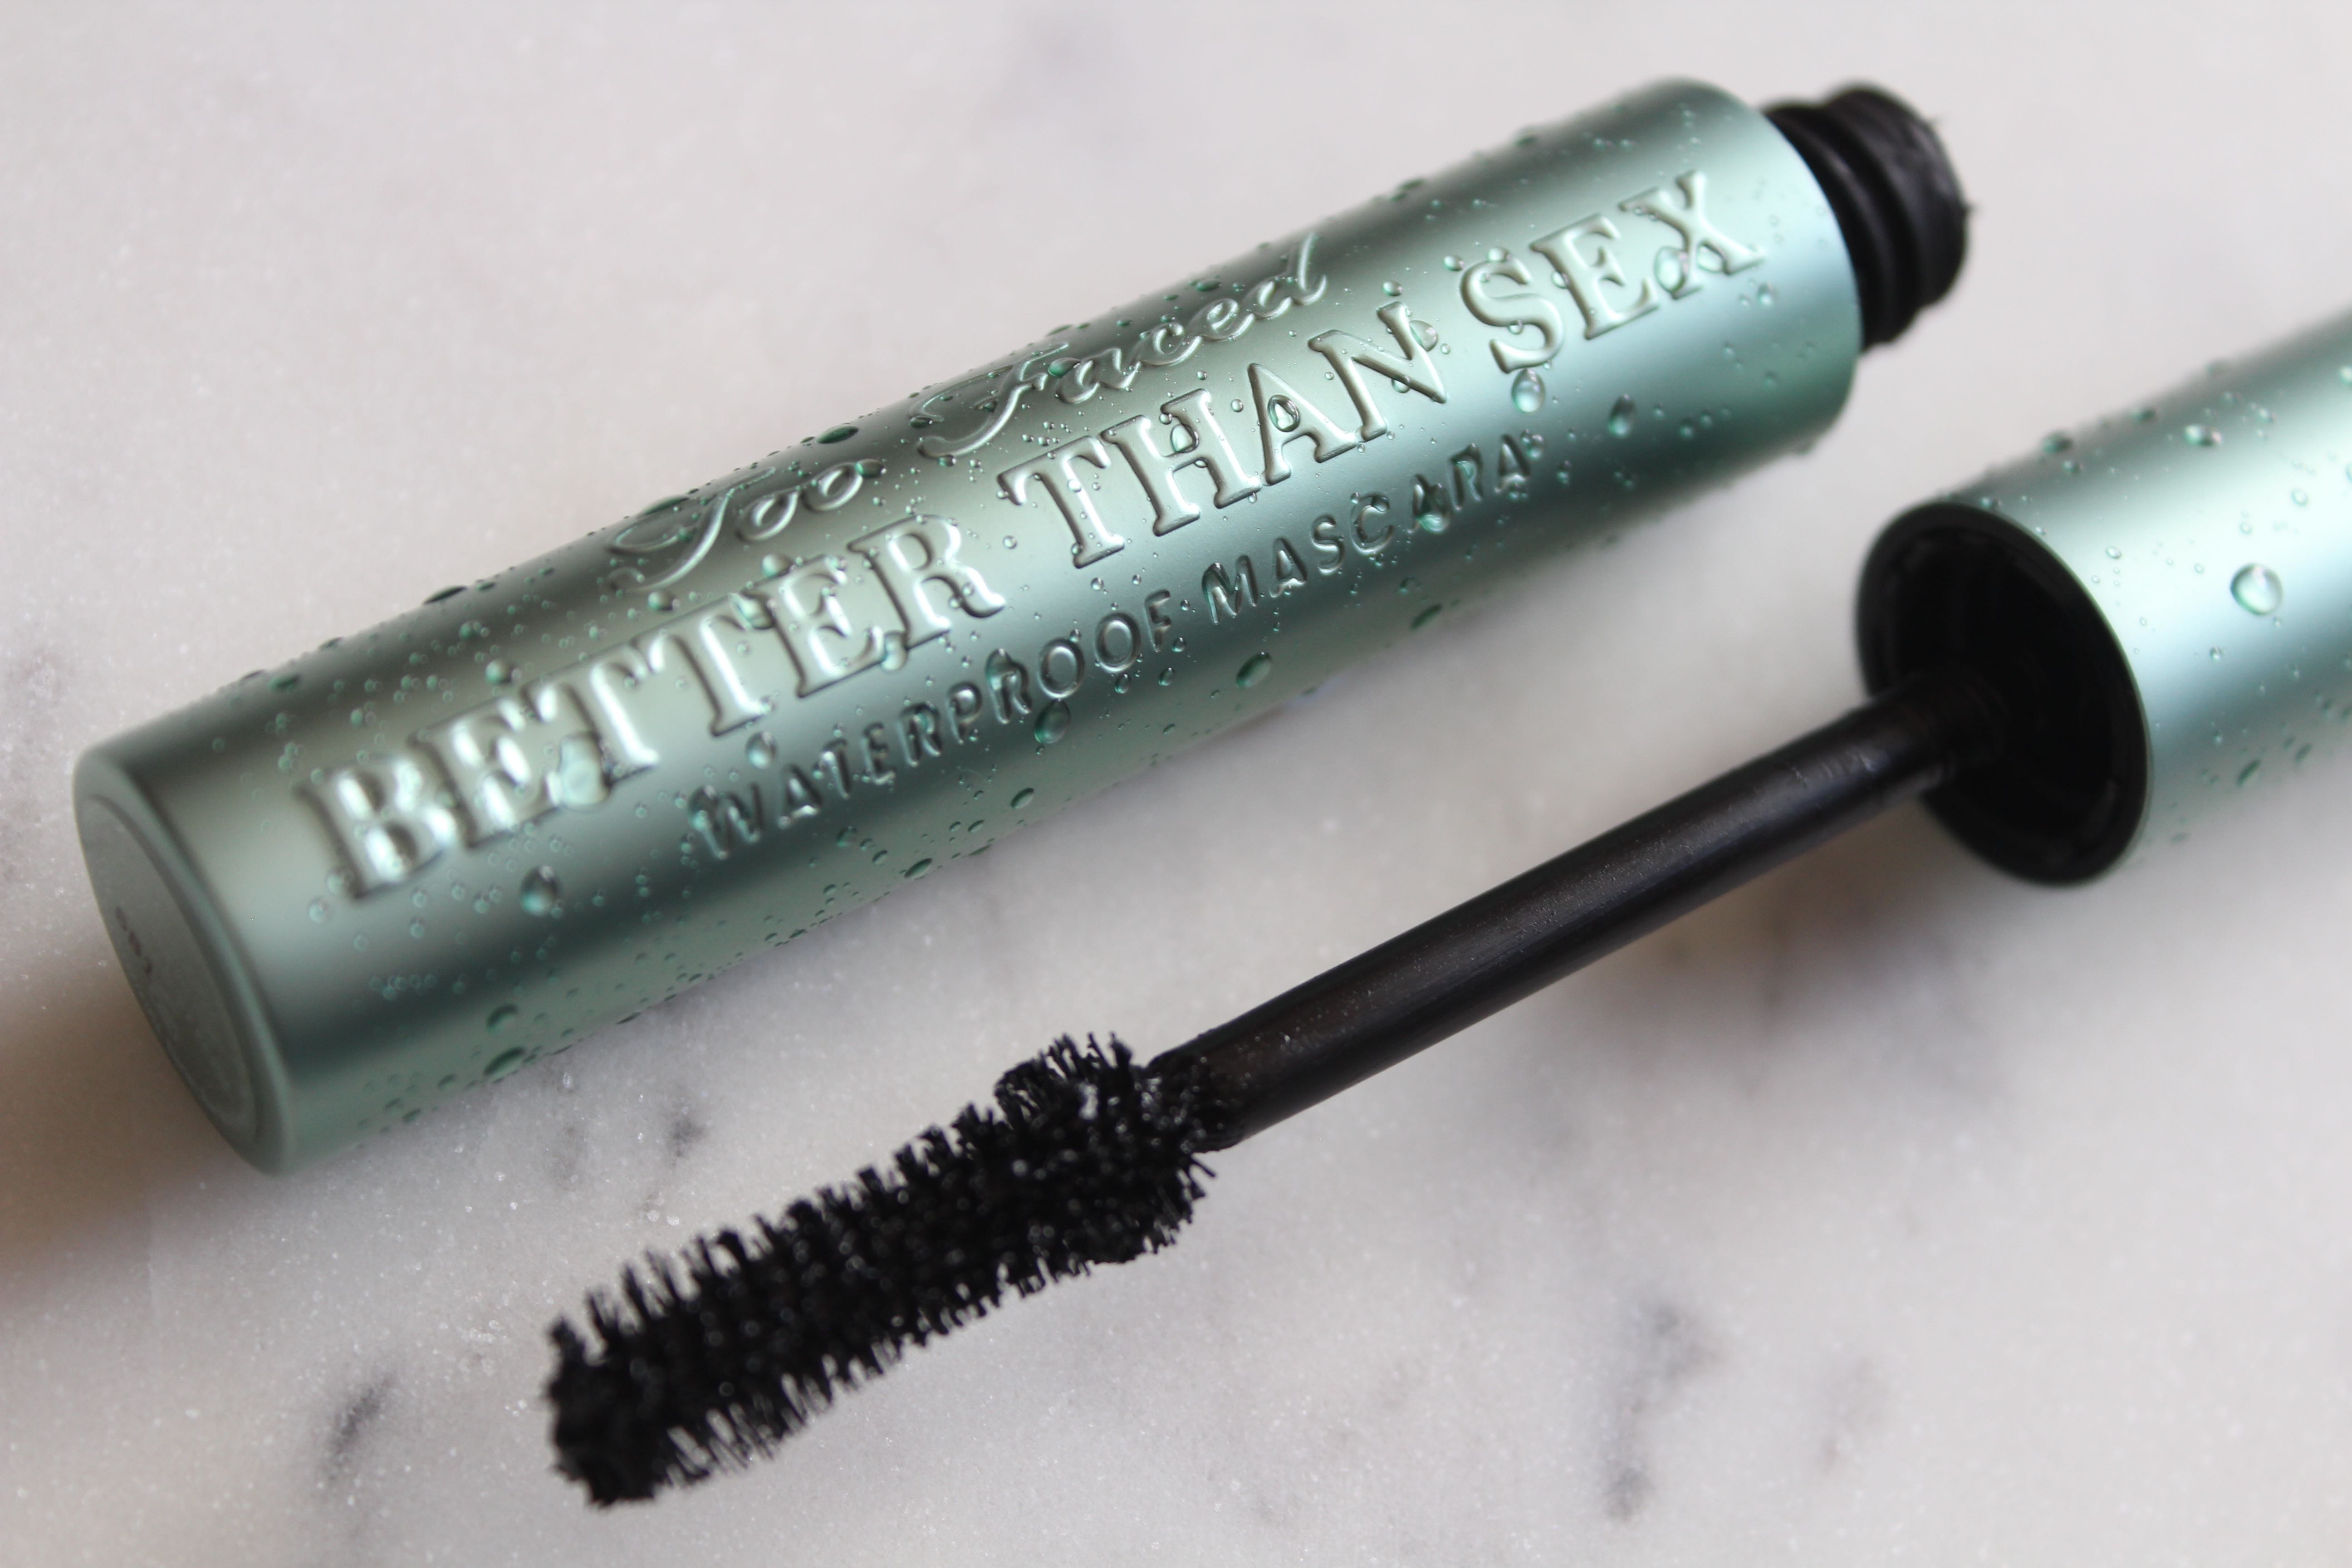 Too Faced Better Than Sex Waterproof Mascara review by Facemadeup.com